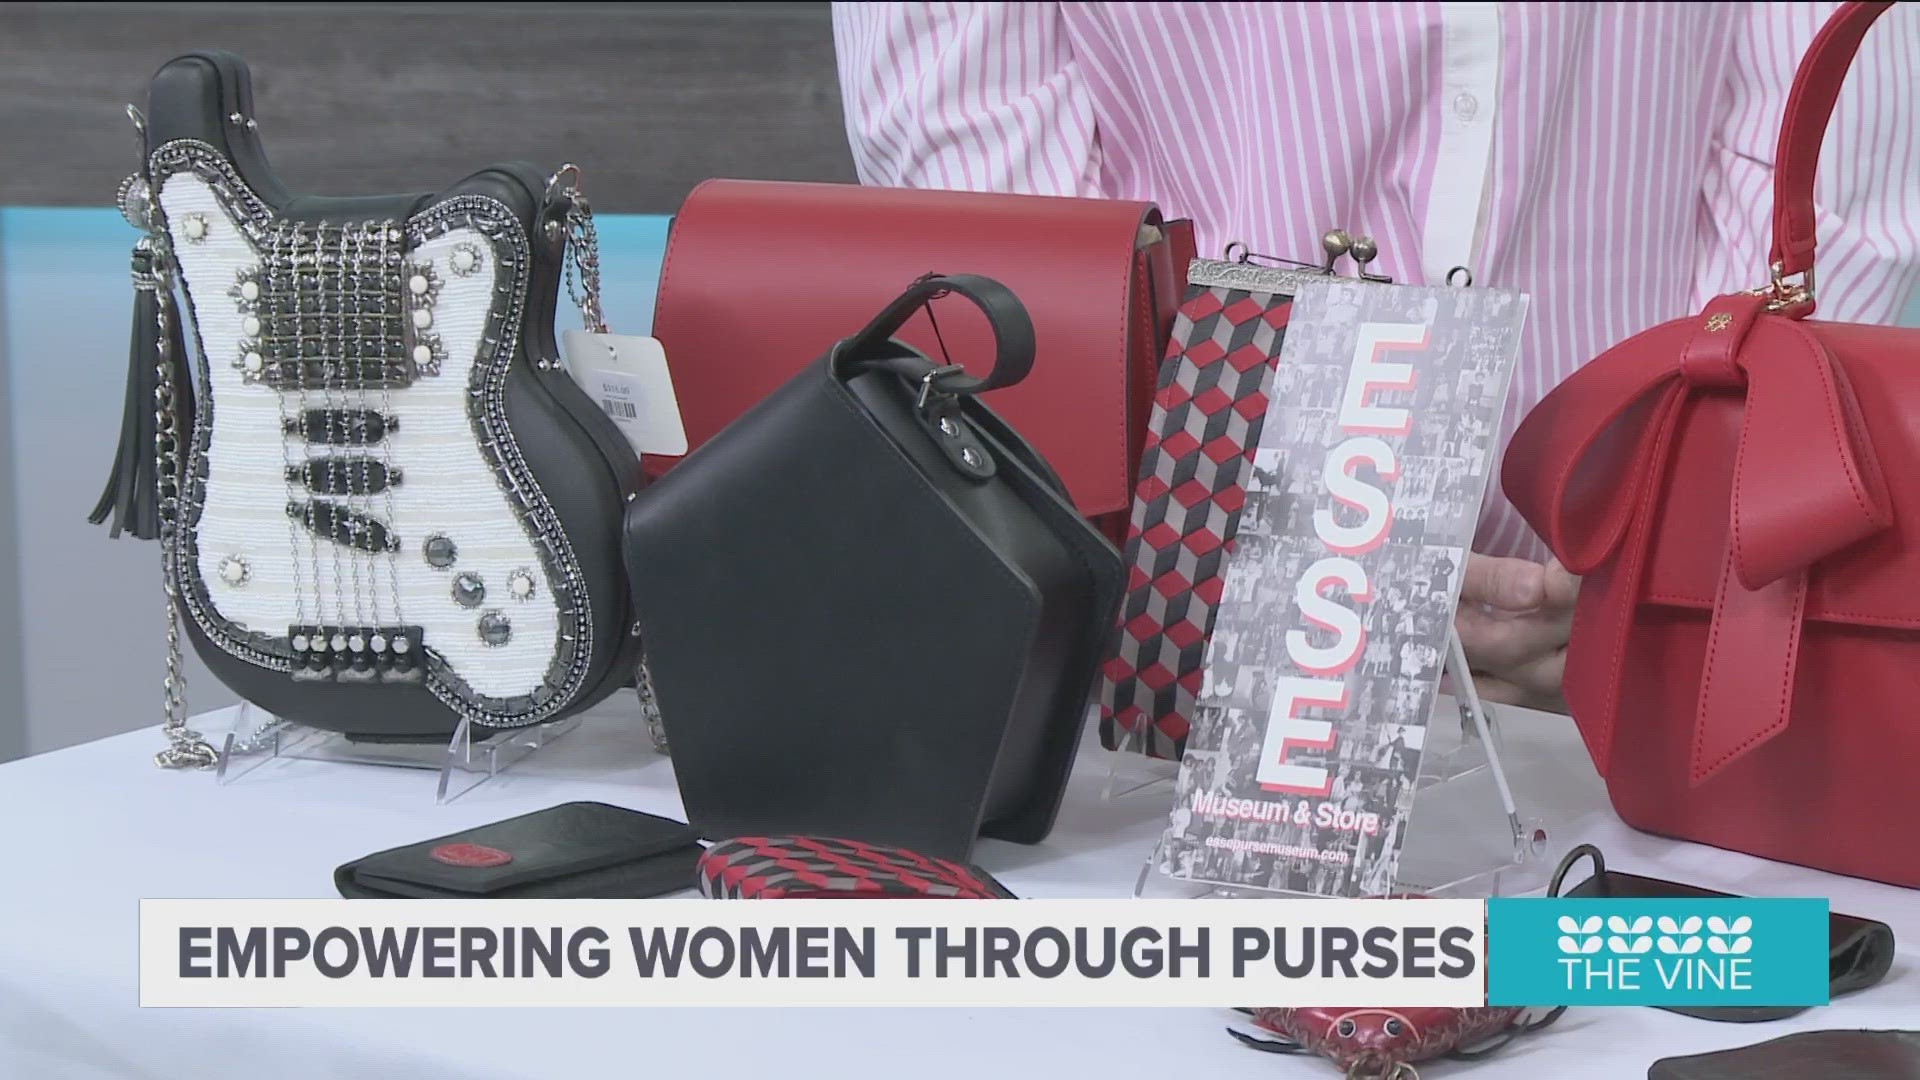 Annaleah Witsell, from the Esse Purse Museum & Store, tells us about how they showcase women's history.